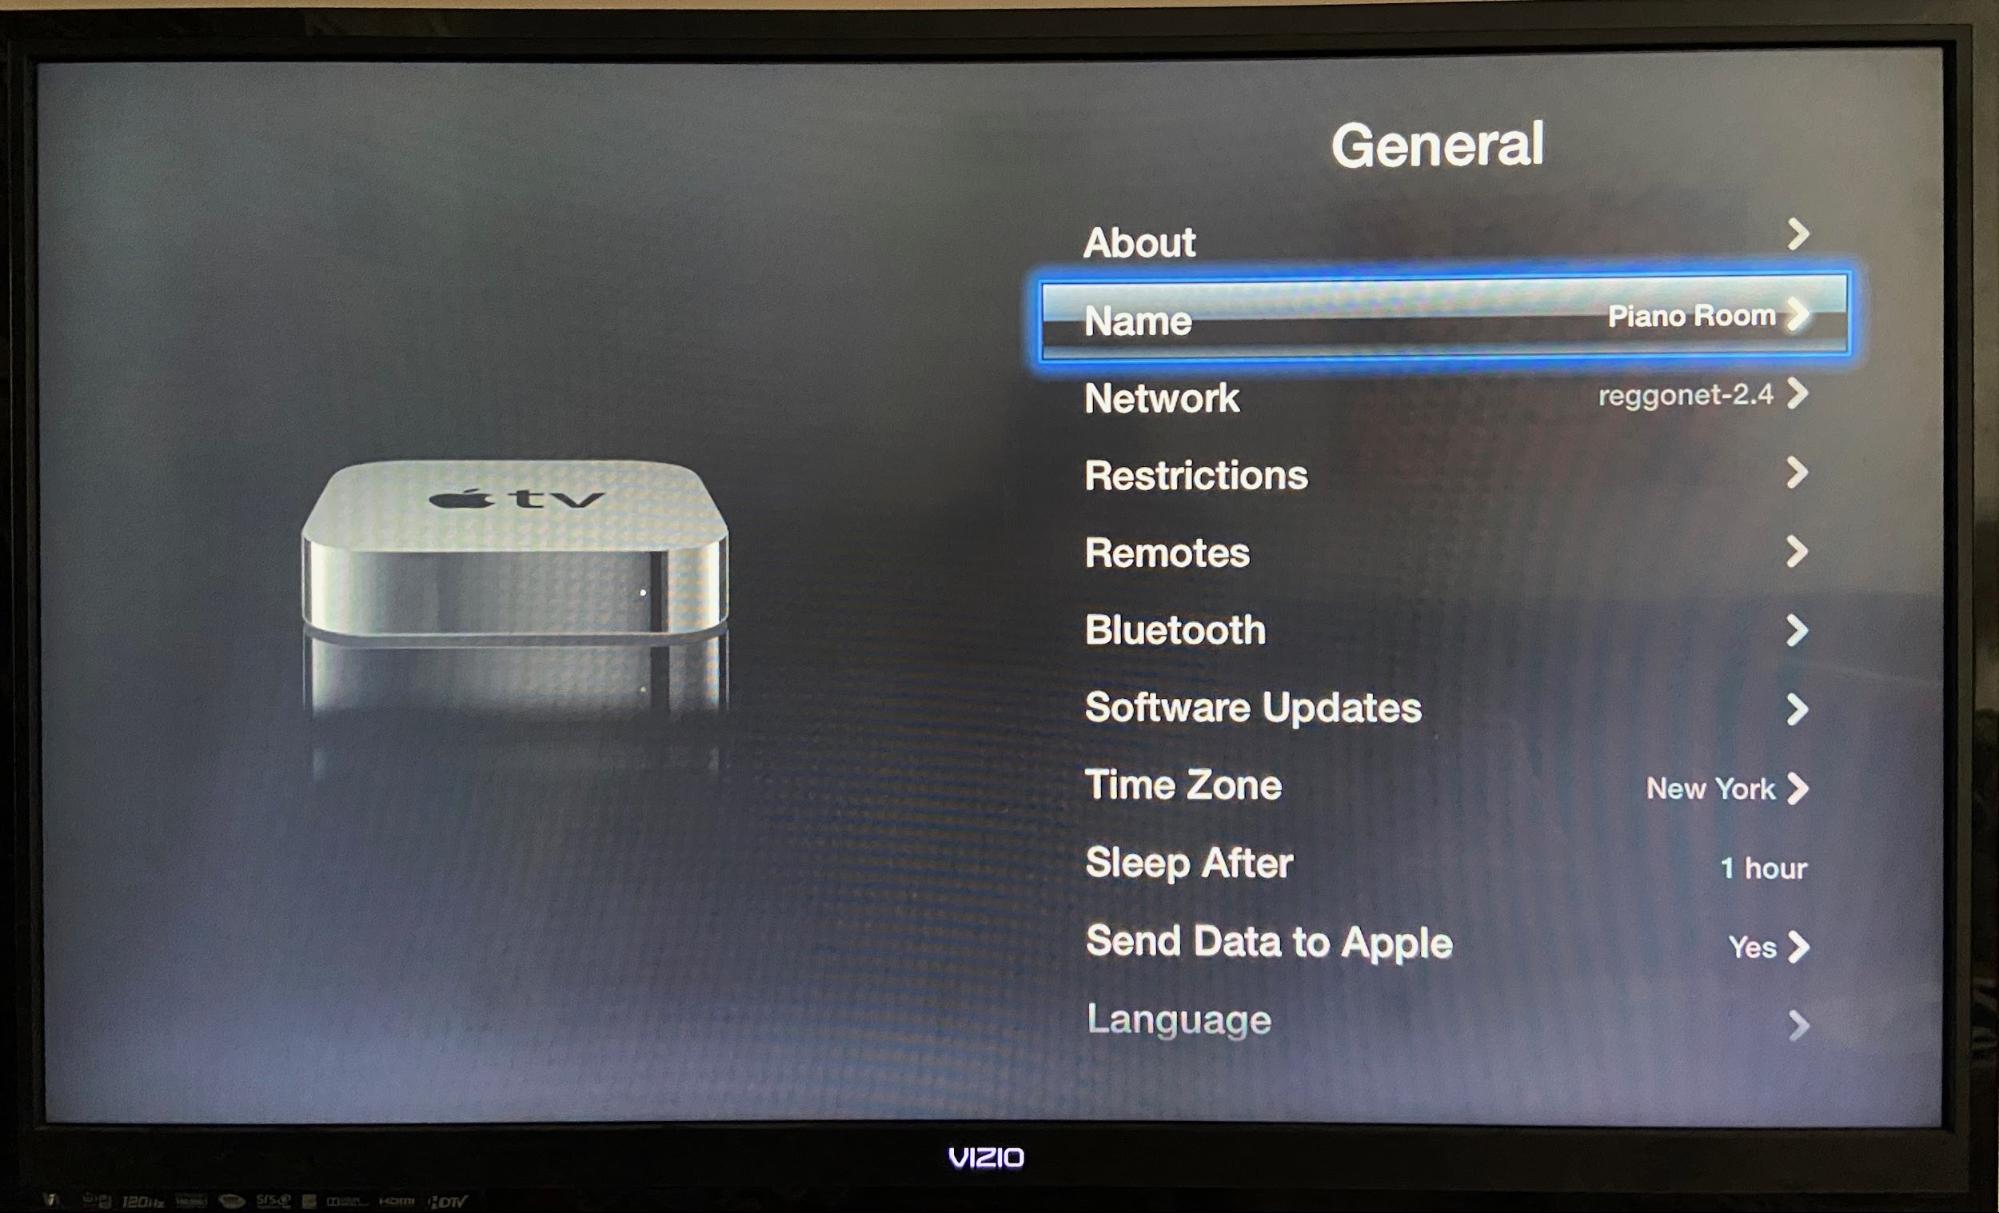 Add to Your Classic Stereo Old Apple TV - TidBITS